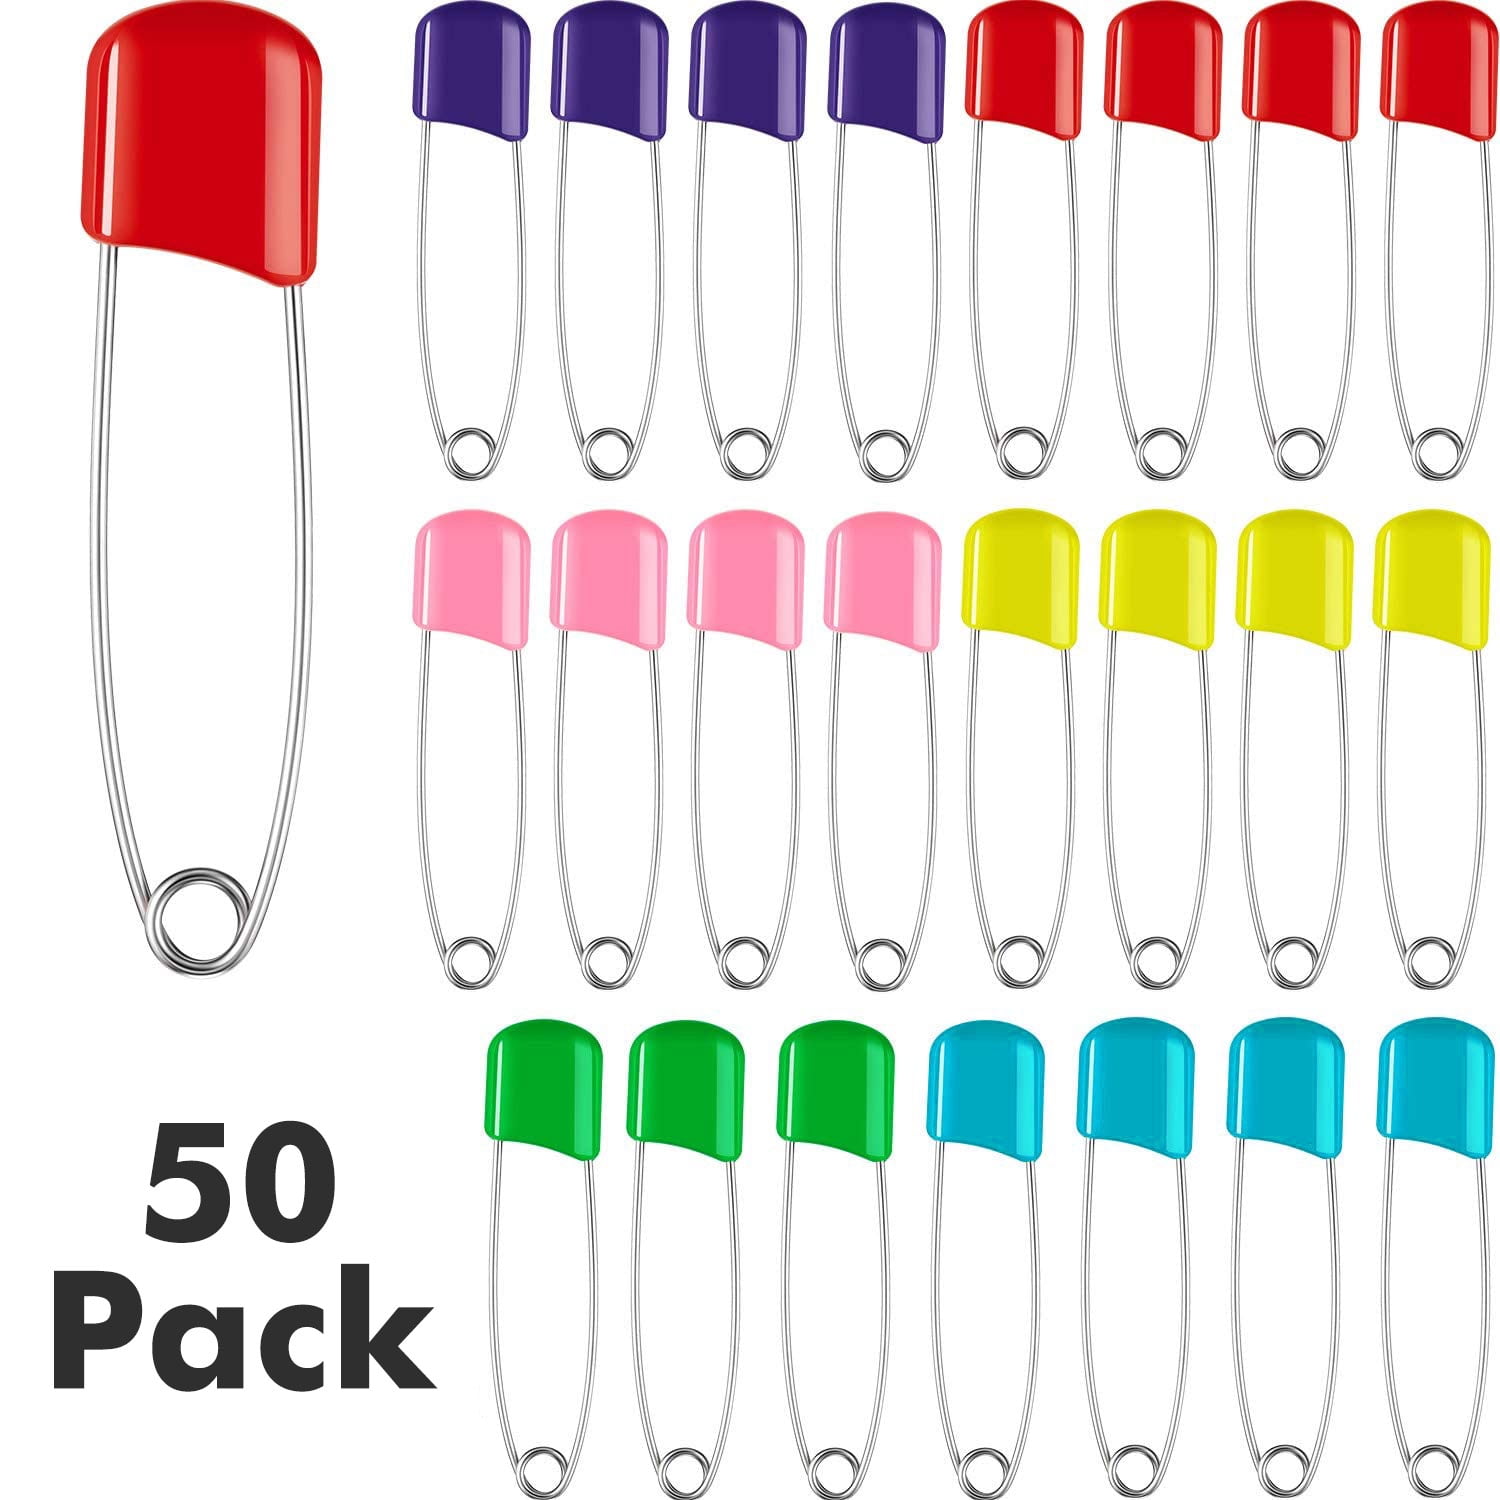 50 Pieces Diaper Pins Baby Diapers Safety Pins with Locking Closure  Stainless Steel Baby Pin Plastic Head Safety Pin for Clothes Diaper Laundry  Crafts